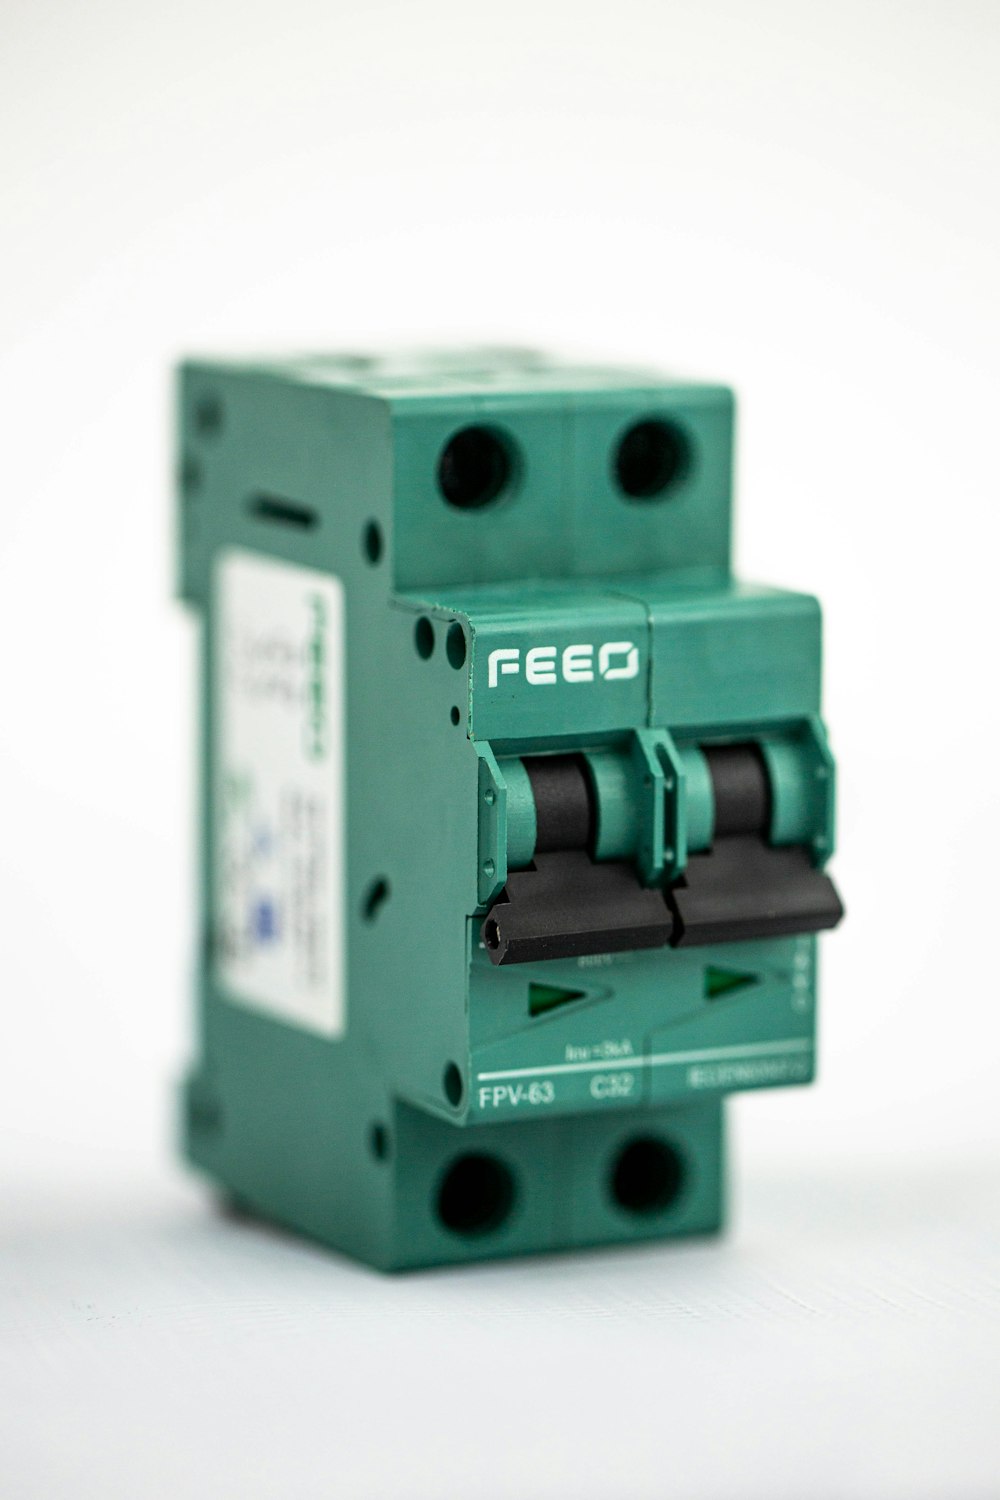 a close up of a green electrical device